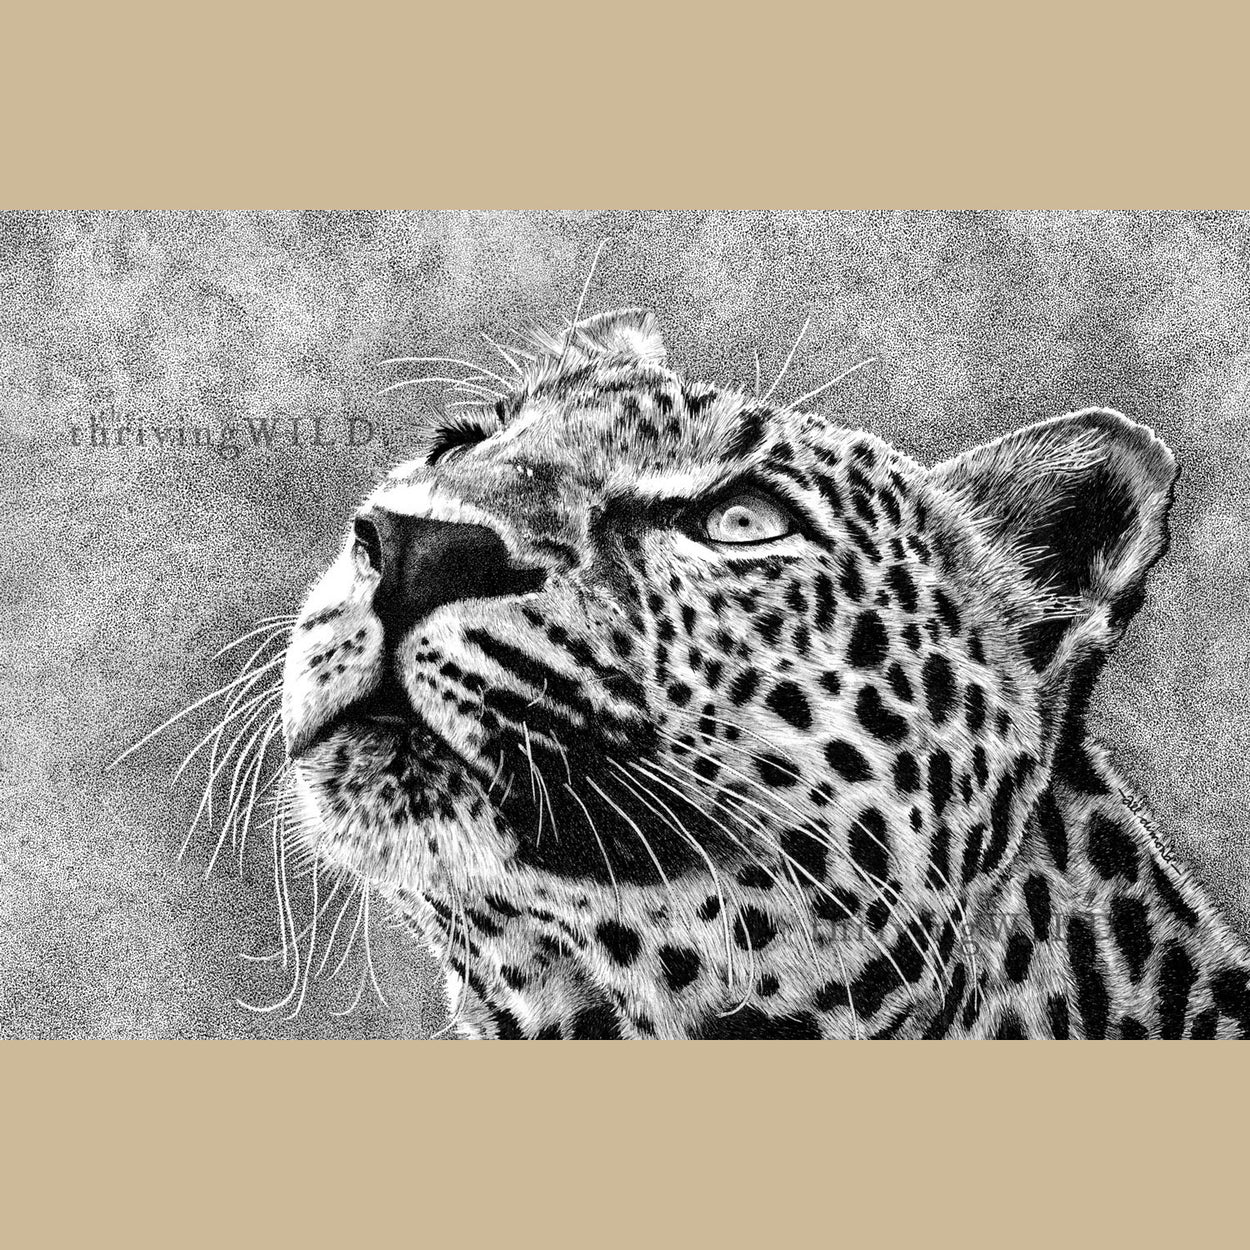 Leopard Pen Drawing Wildlife - The Thriving Wild